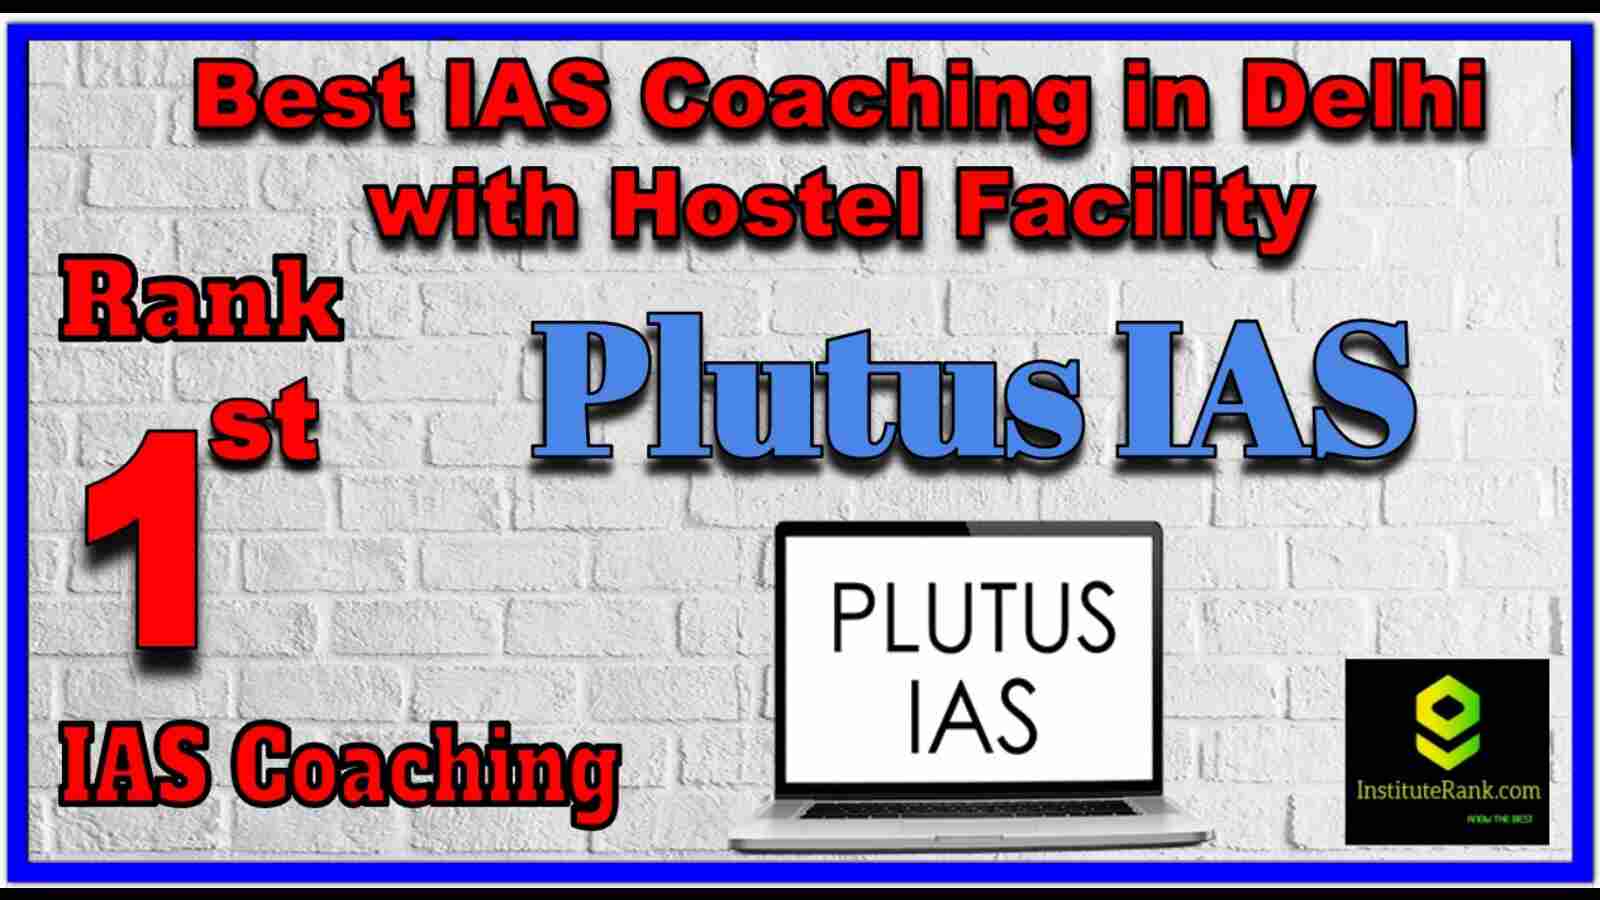 plutus ias best ias coaching in delhi with hostel Facility